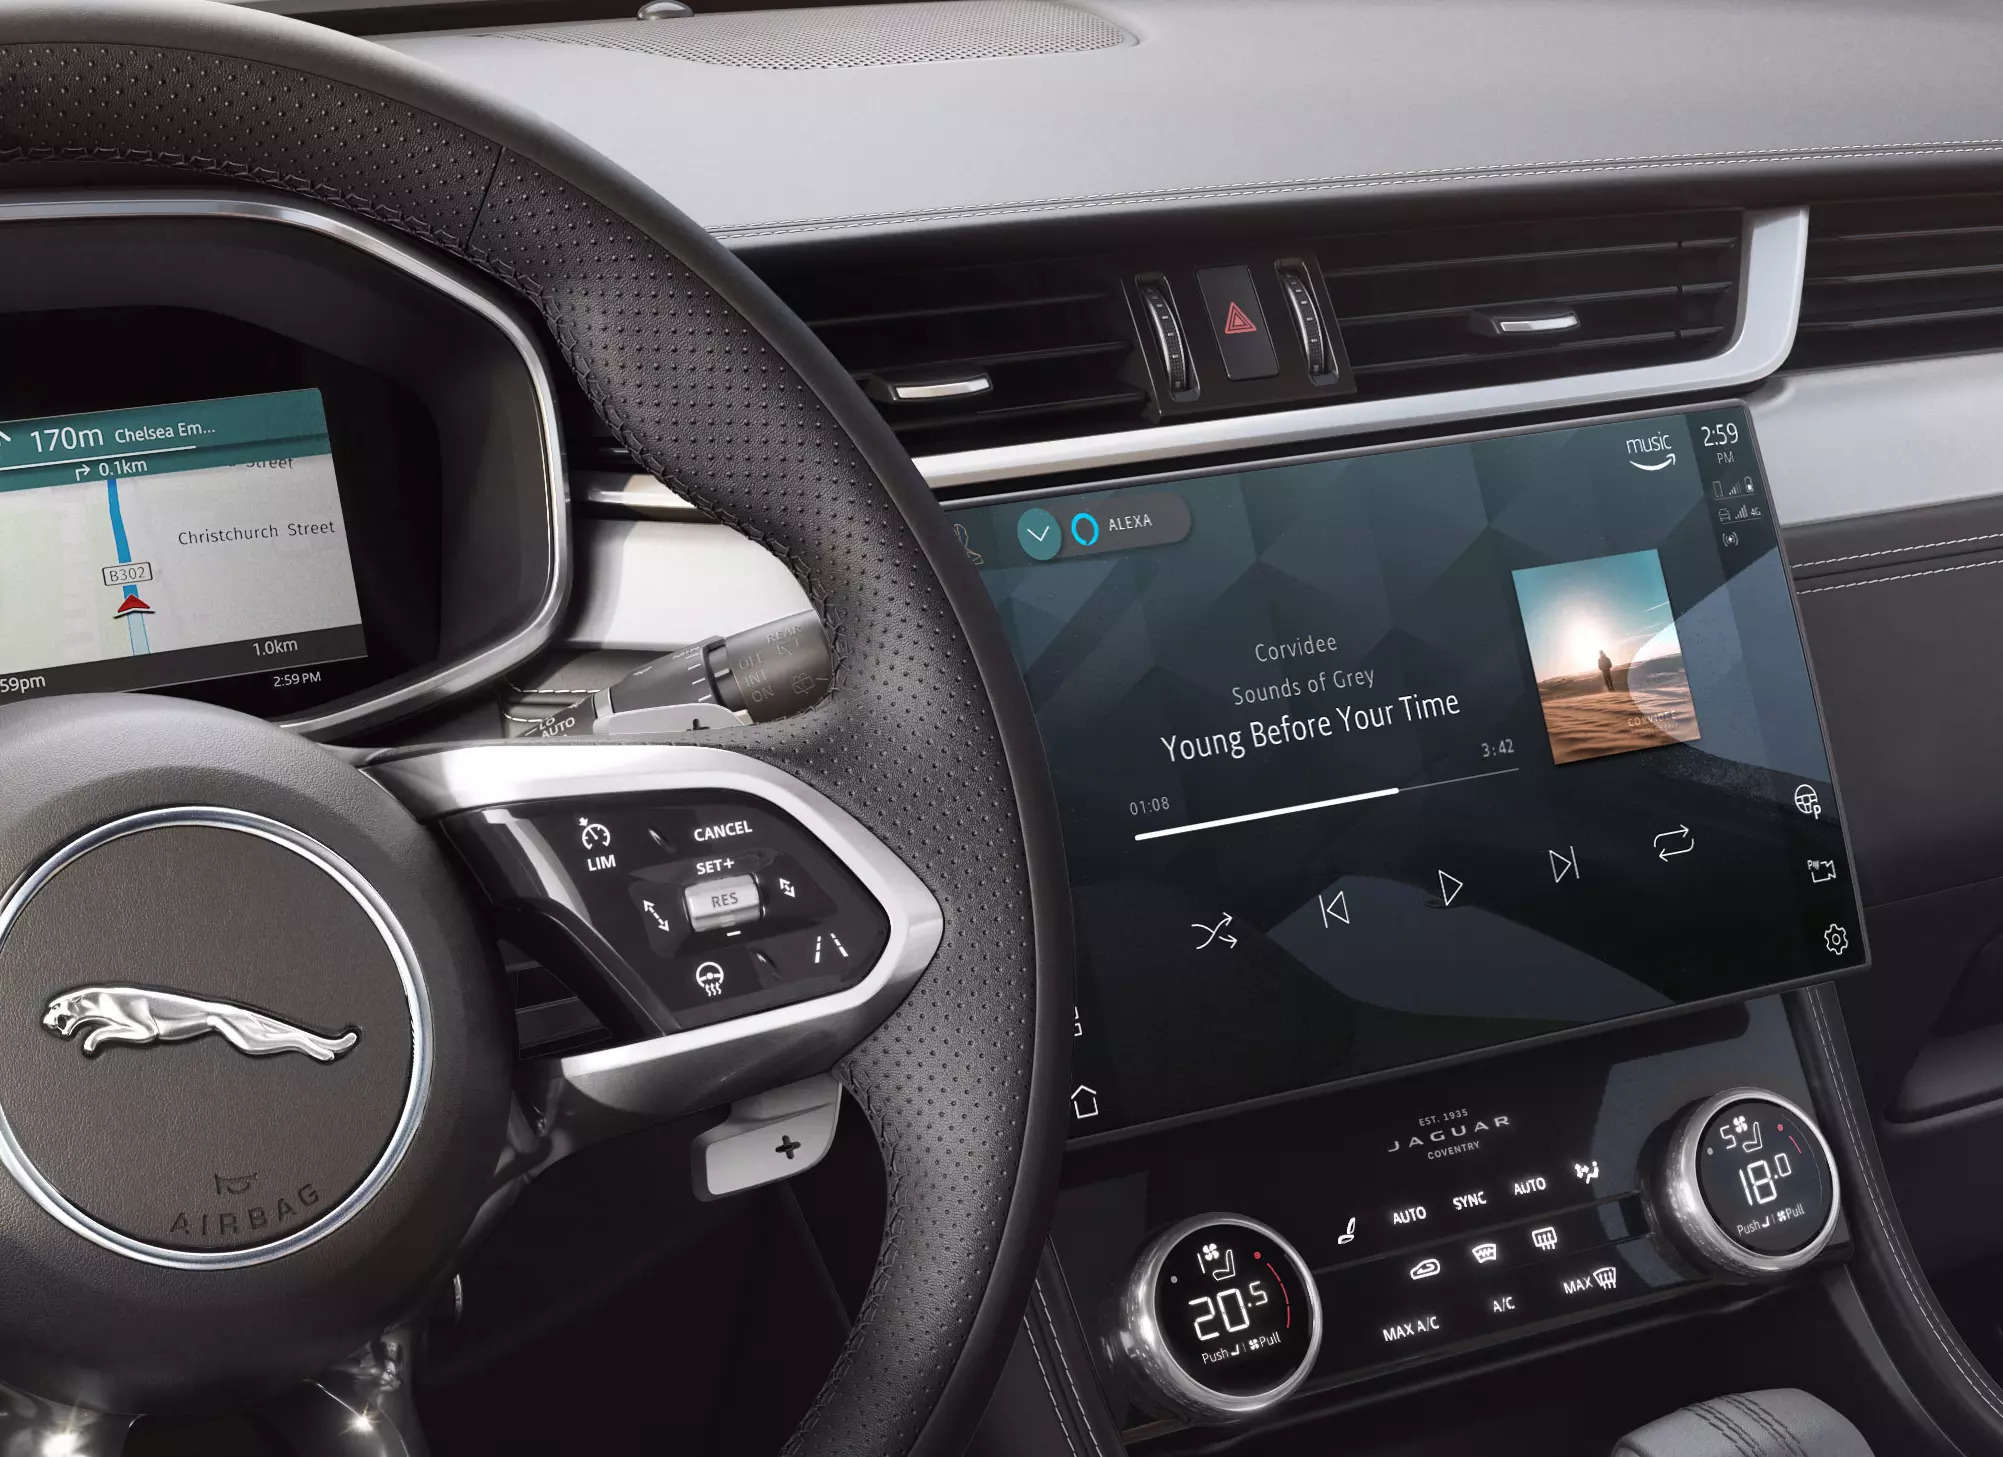  You can check on your vehicle wherever you are with the Jaguar and Land Rover Remote Skill for Alexa.